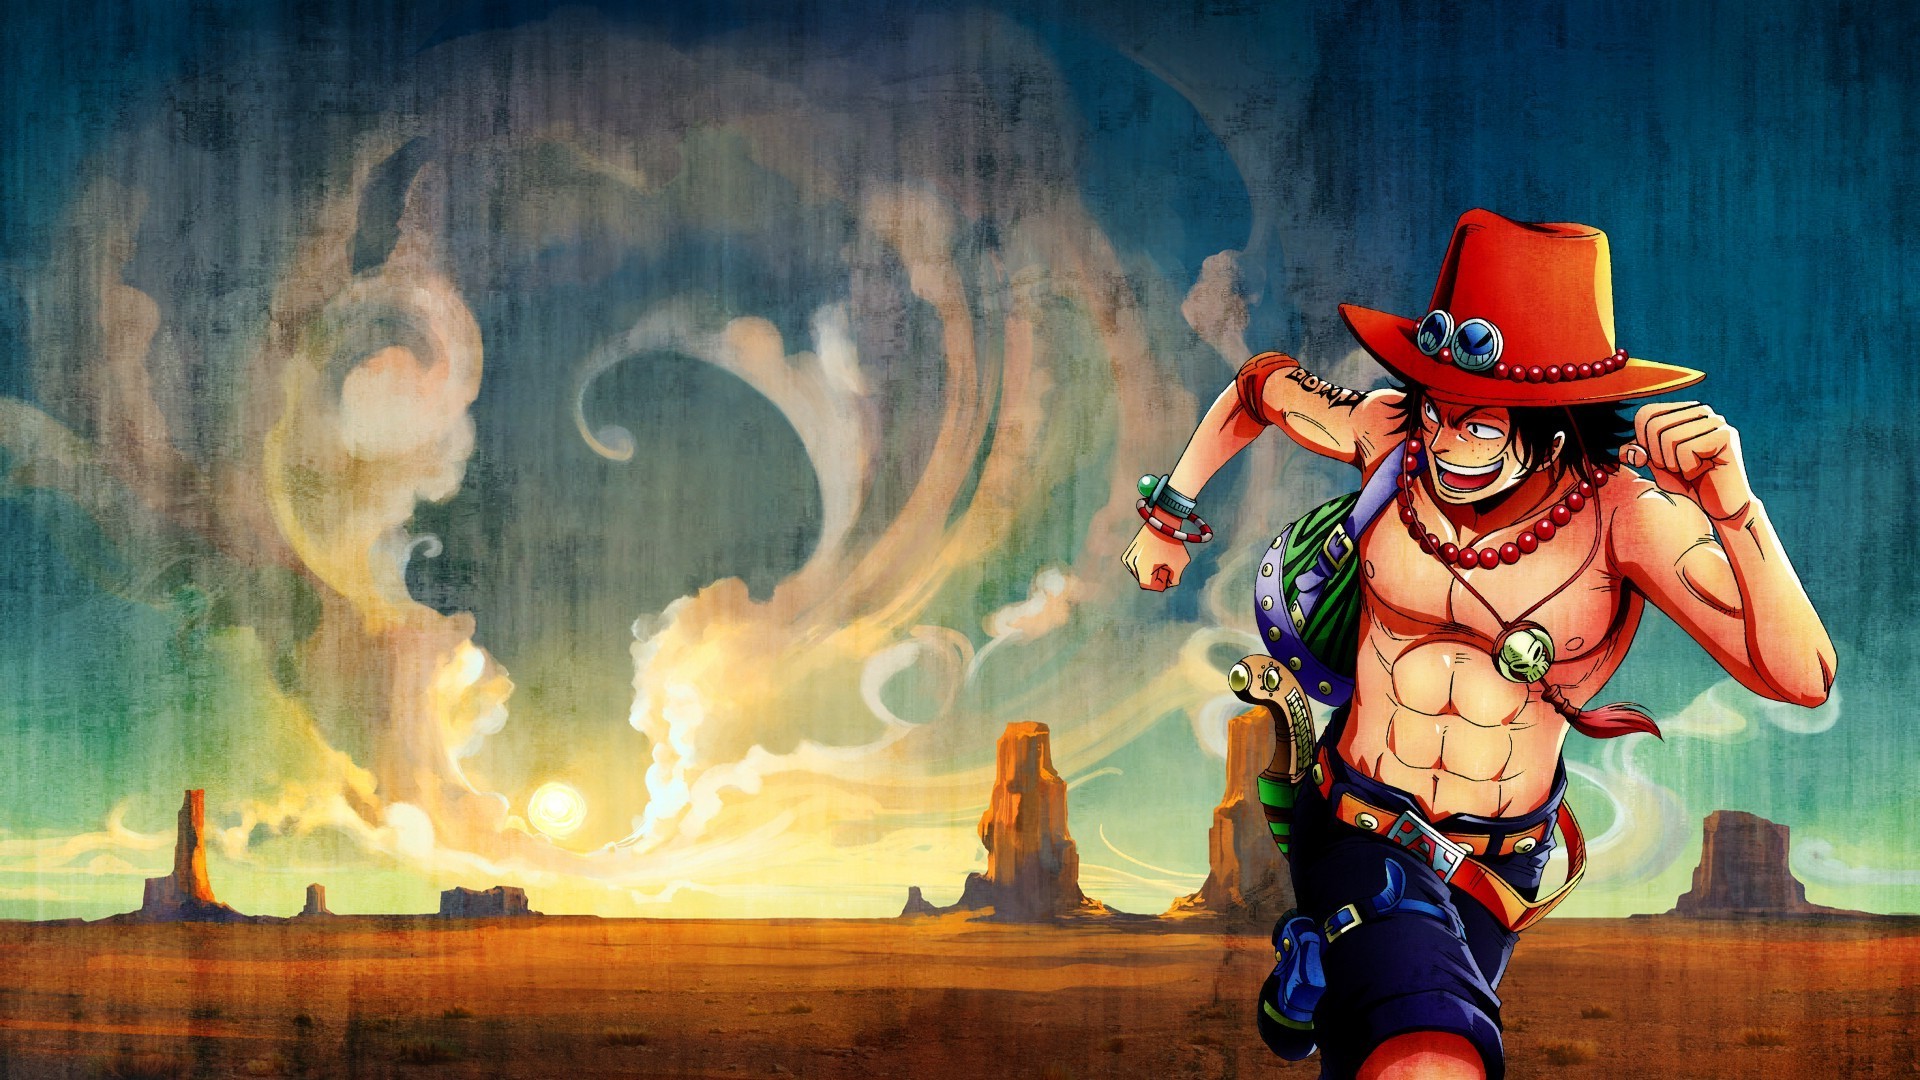 Portgas D Ace One Piece Wallpapers  HD Desktop and 